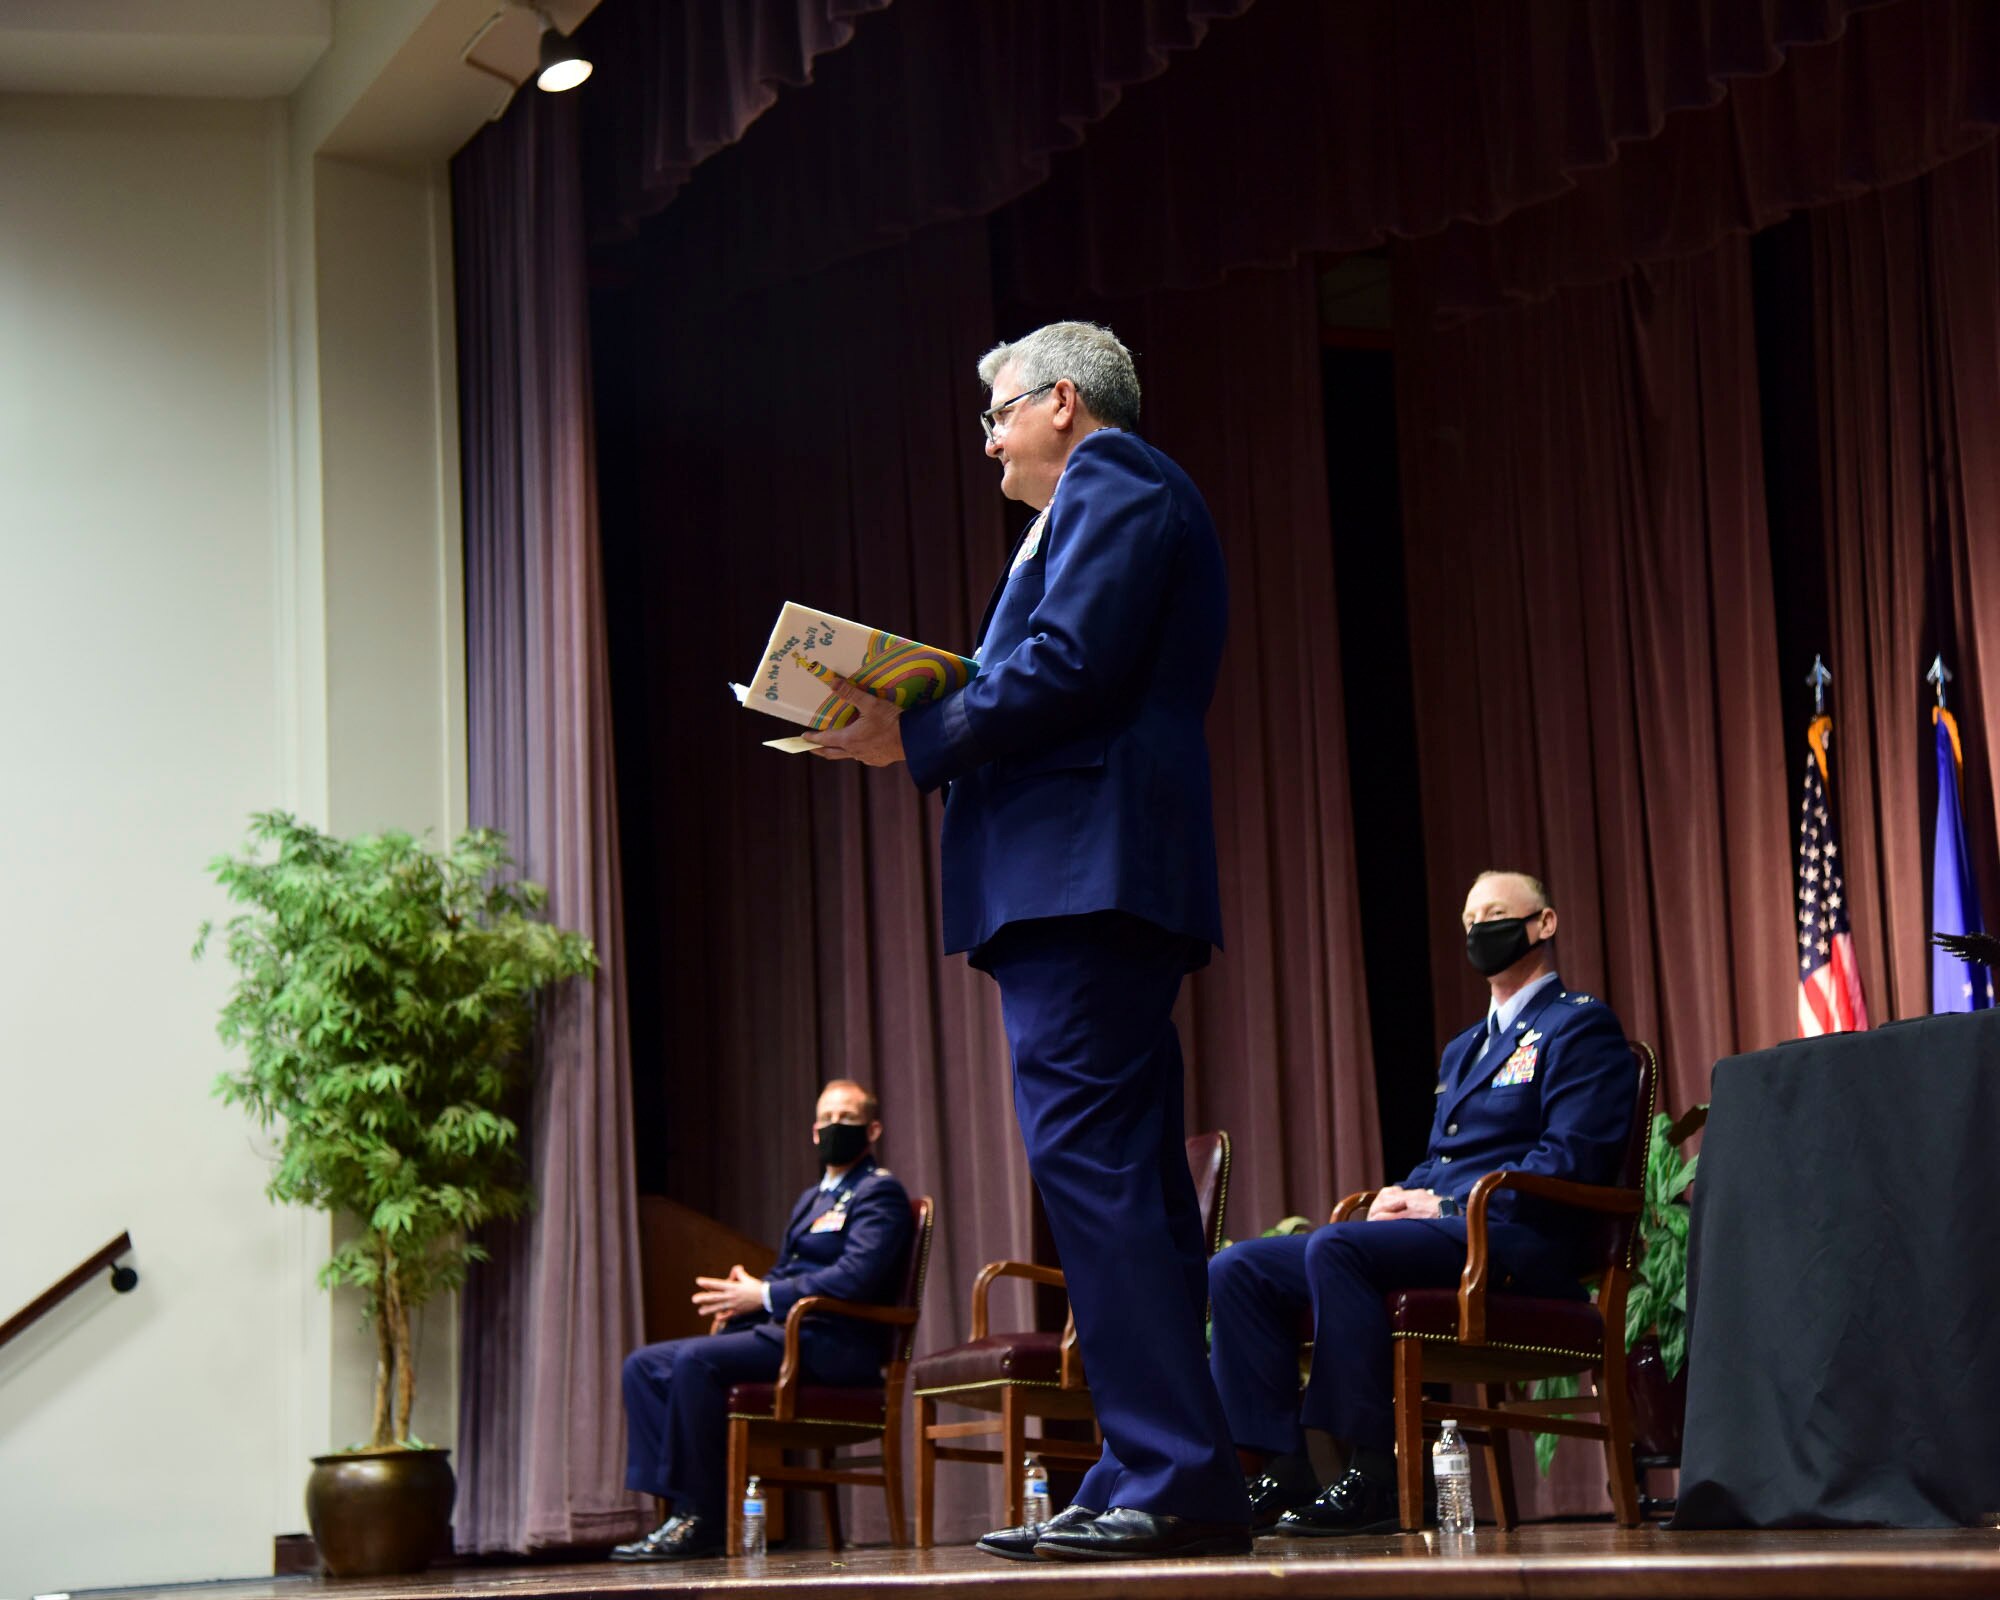 Retired U.S Air Force Lt. Gen. Vern Findley II, former Air Mobility Command, Scott Air Force Base, Ill., vice commander from 2008-2011, reads an excerpt from Dr. Seuss’ children’s story book ‘Oh the Places You’ll Go’, during the graduation of class 21-06, Feb. 26, 2021, on Columbus Air Force Base, Miss. In compliance with COVID-19 guidelines all attendees maintained 6-feet distancing and mask were mandated. (U.S. Air Force photo by Melissa Duncan-Doublin)